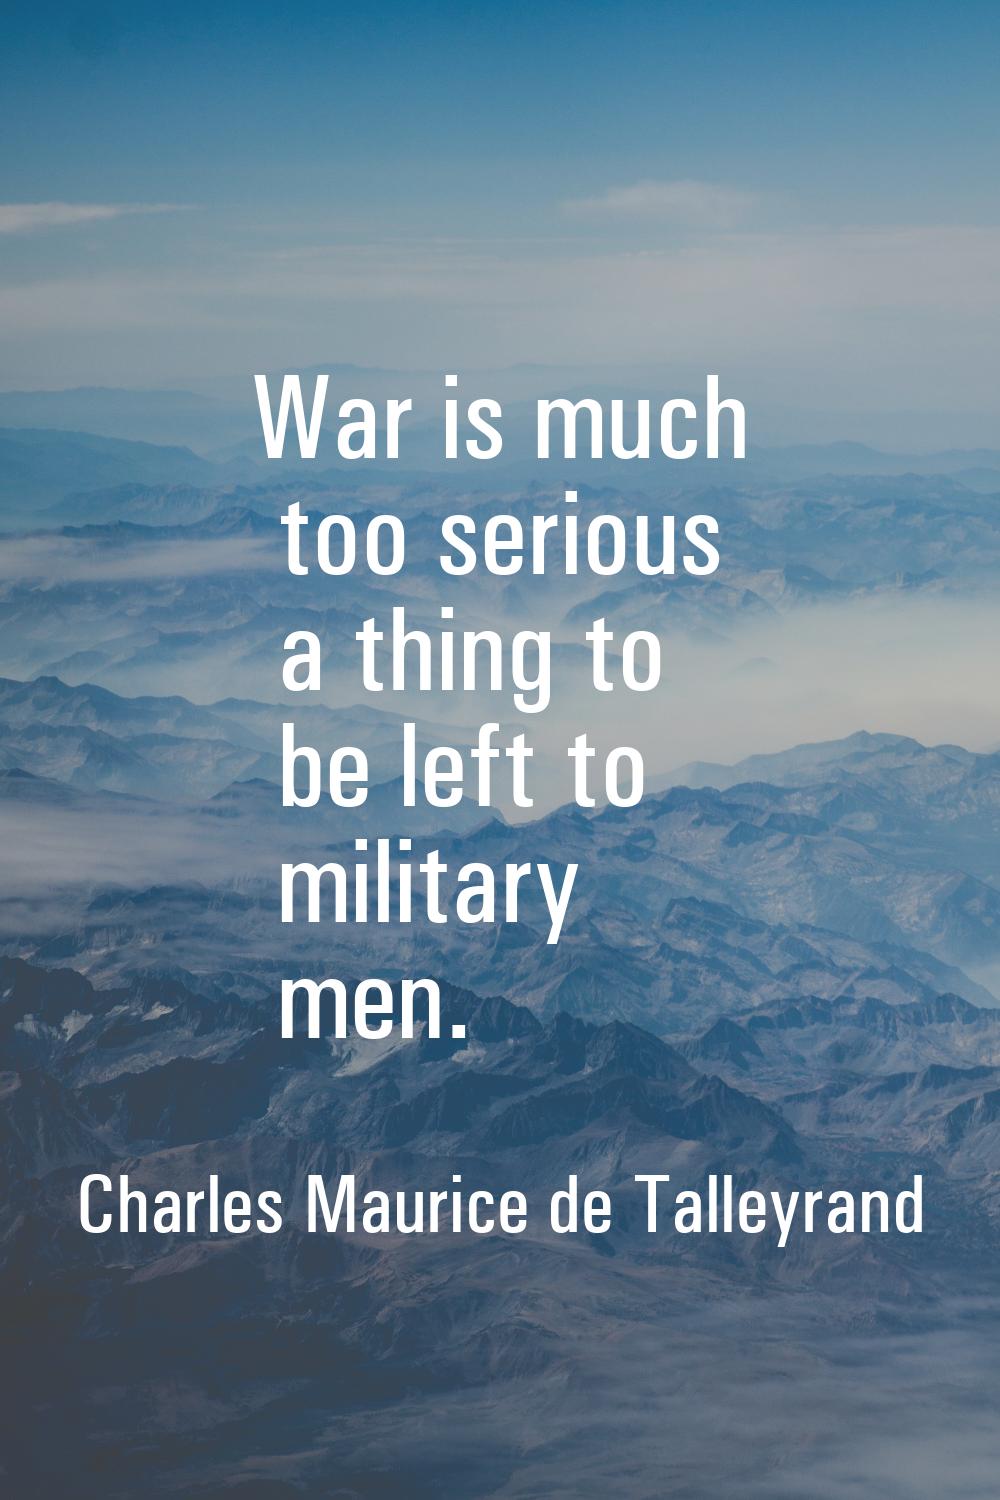 War is much too serious a thing to be left to military men.